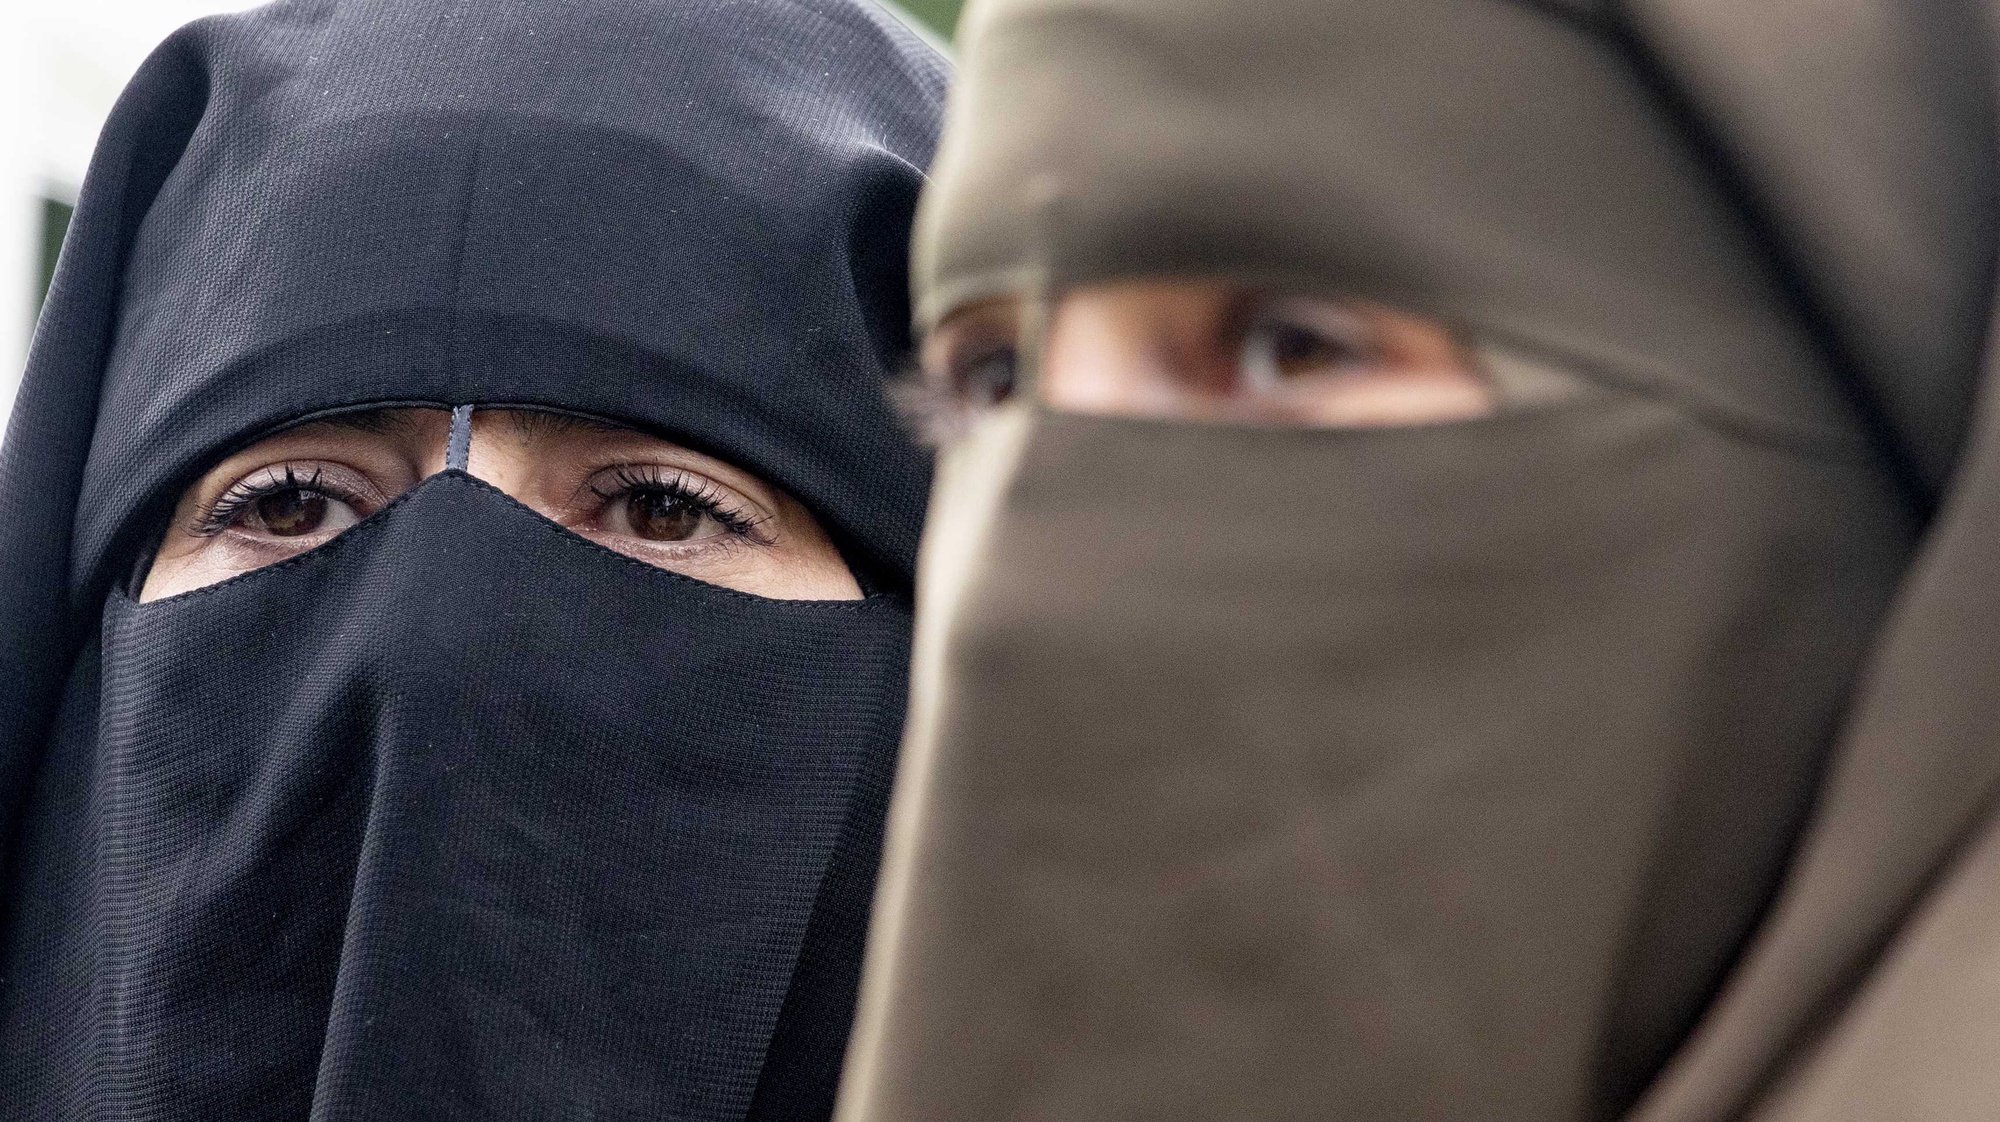 epa07764330 Protester wearing a niqab demonstrate against the burqa ban in The Hague, Netherlands, 09 August 2019. During the campaign, niqabs comparable to burqas were distributed. Dutch burqa ban came into force on 01 August 2019. The Netherlands joins a number of other European nations in implementing the controversial law.  EPA/NIELS WENSTEDT